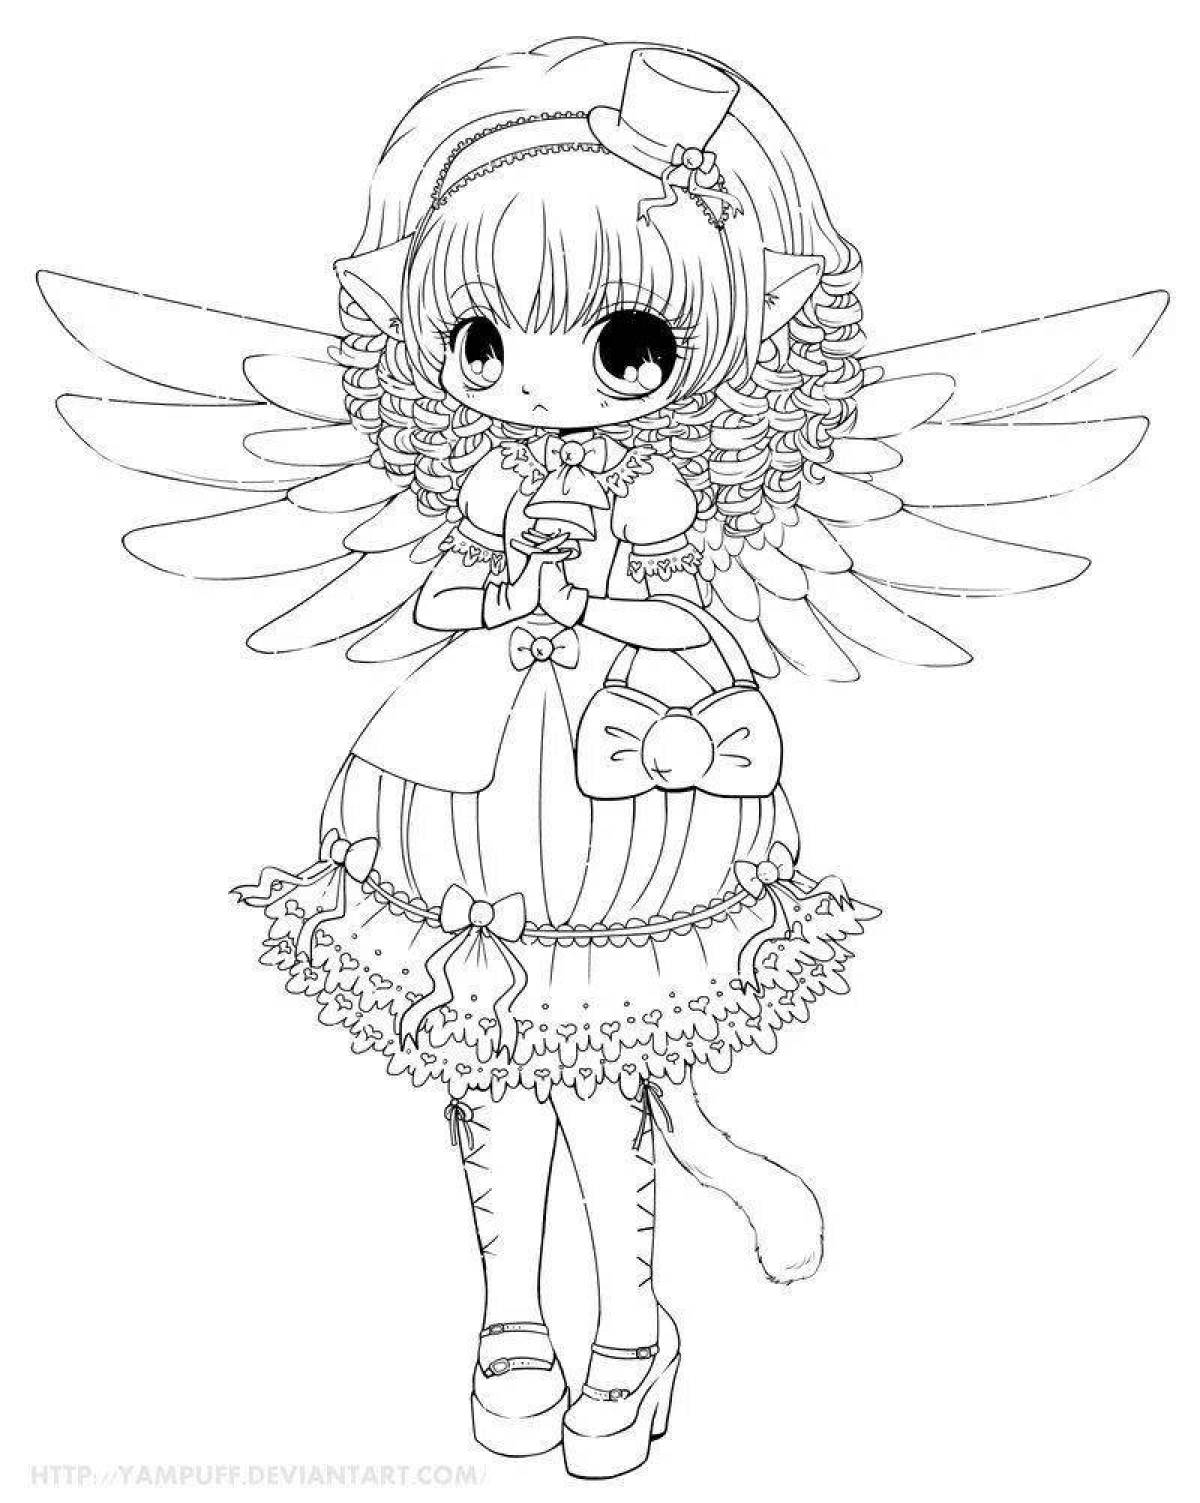 Bright coloring girl with wings